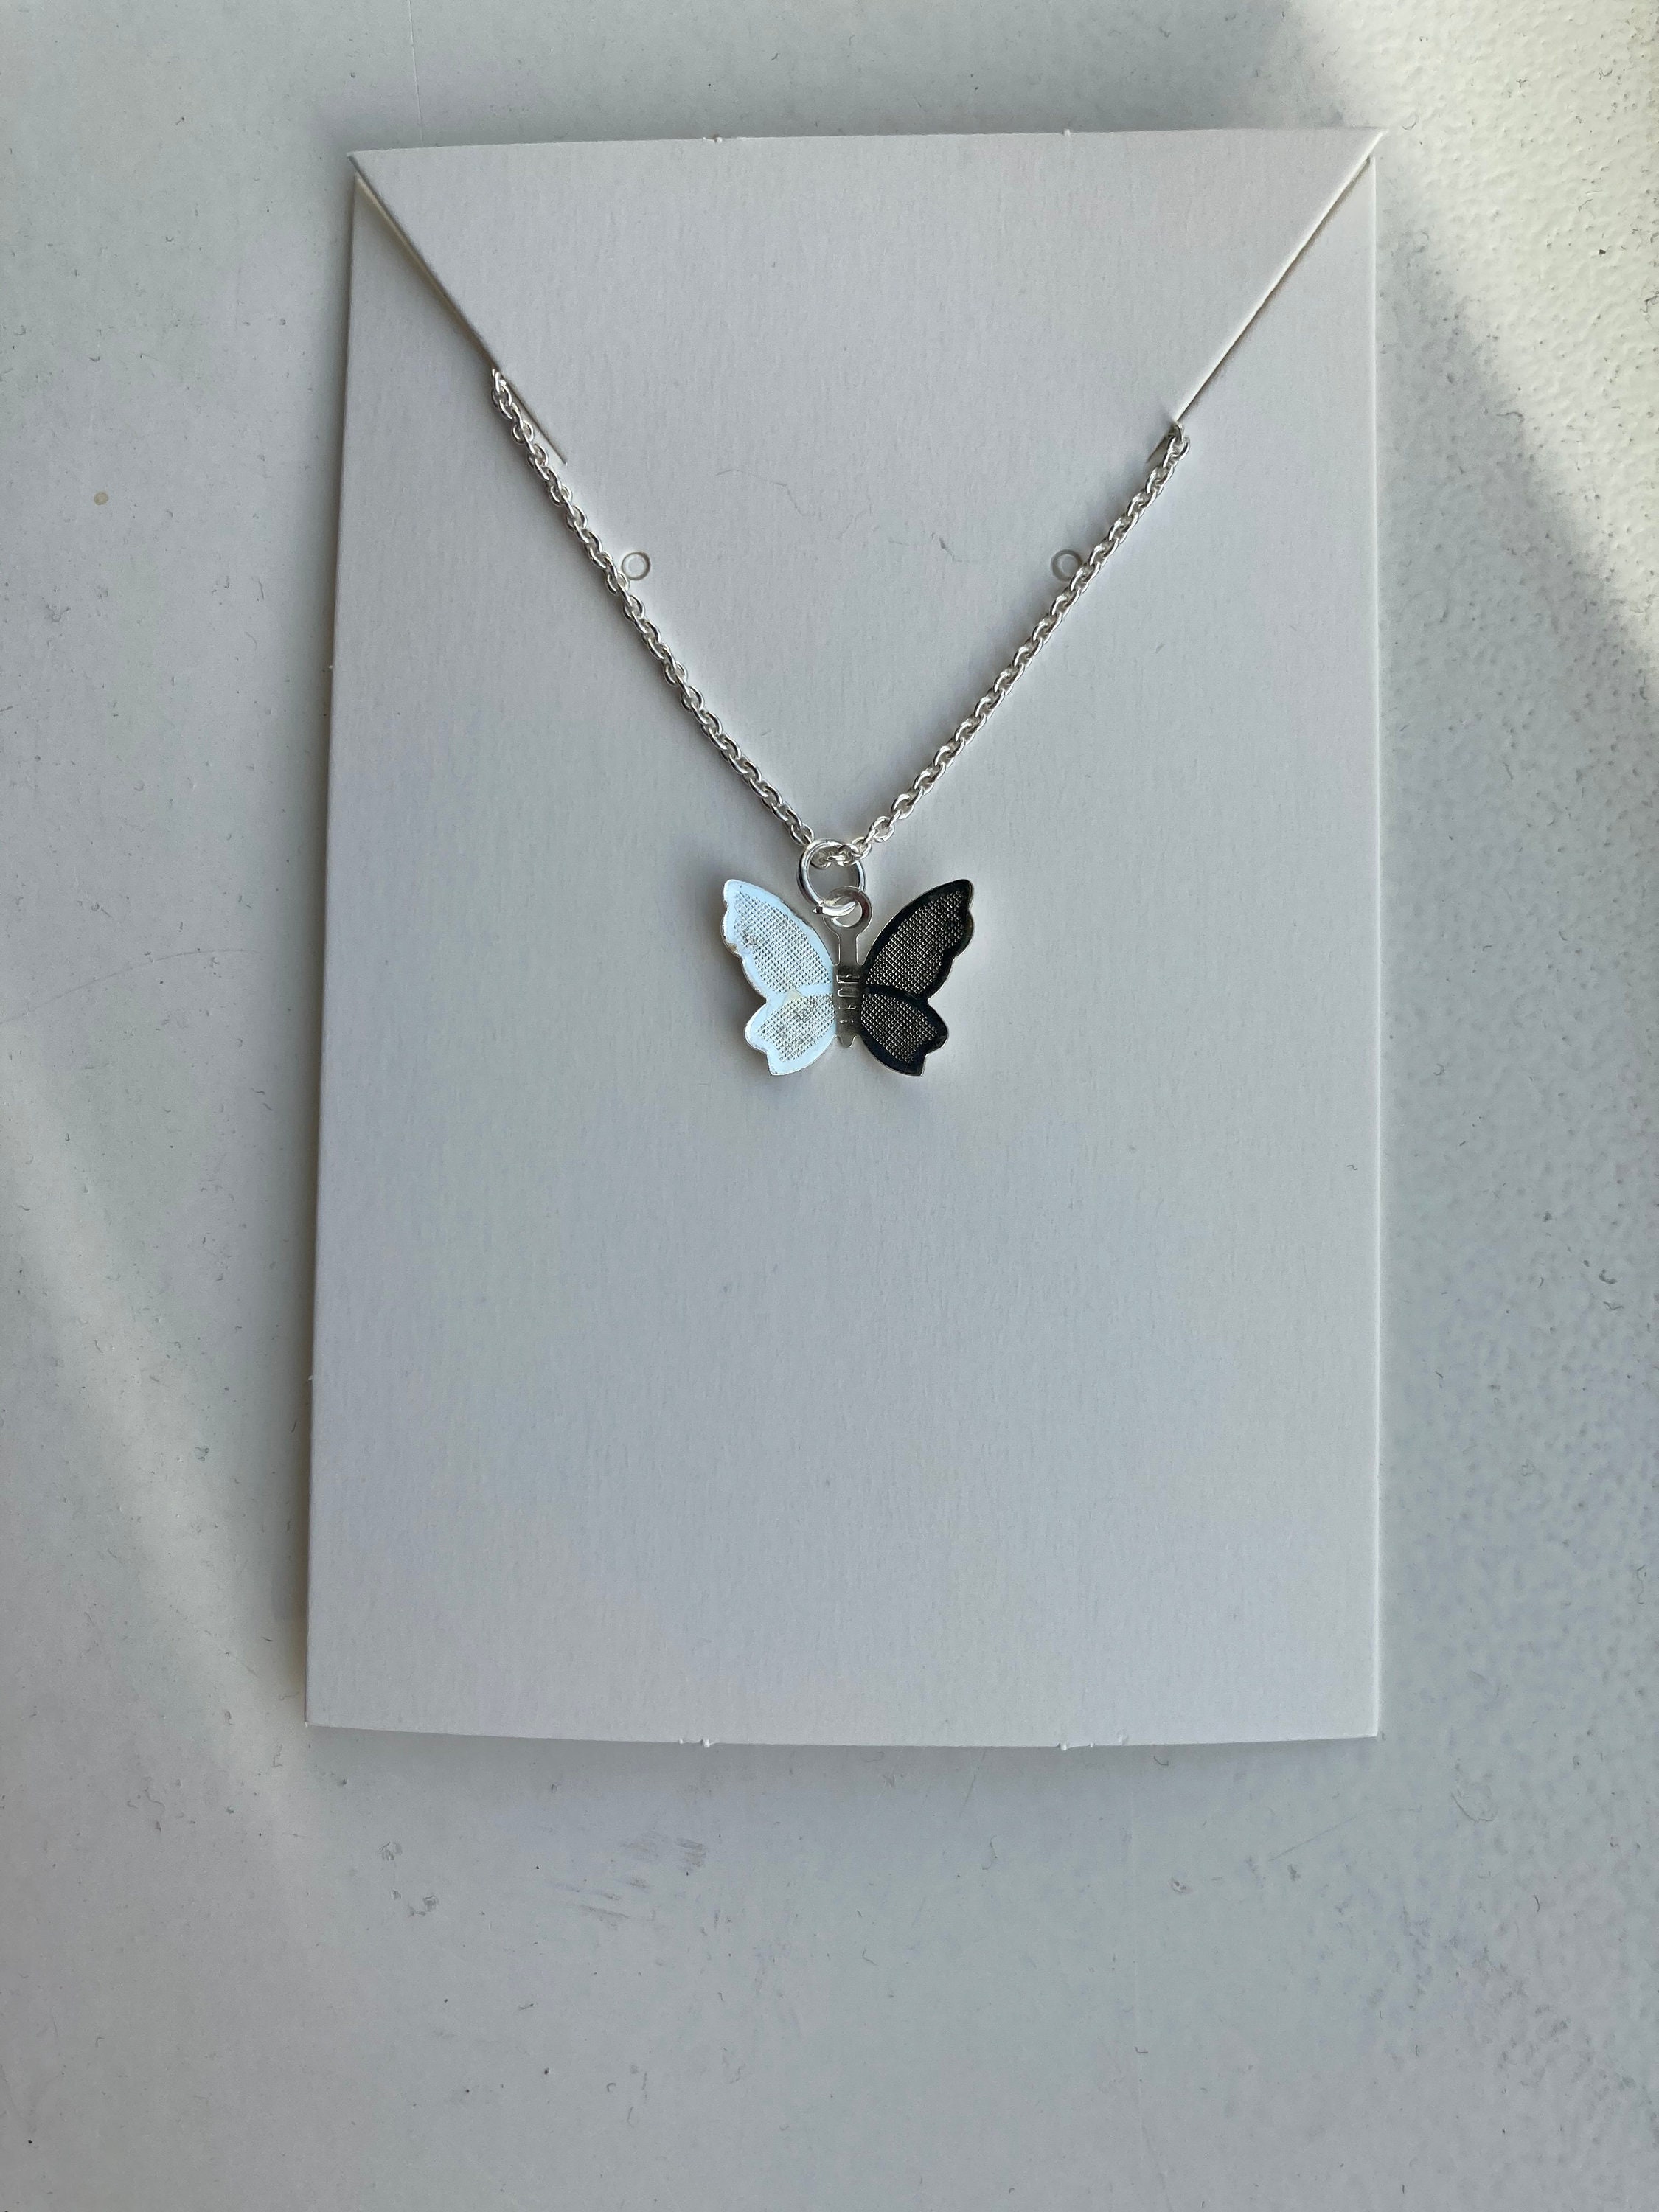 Fly Away Butterfly Necklace in Silver - Etsy